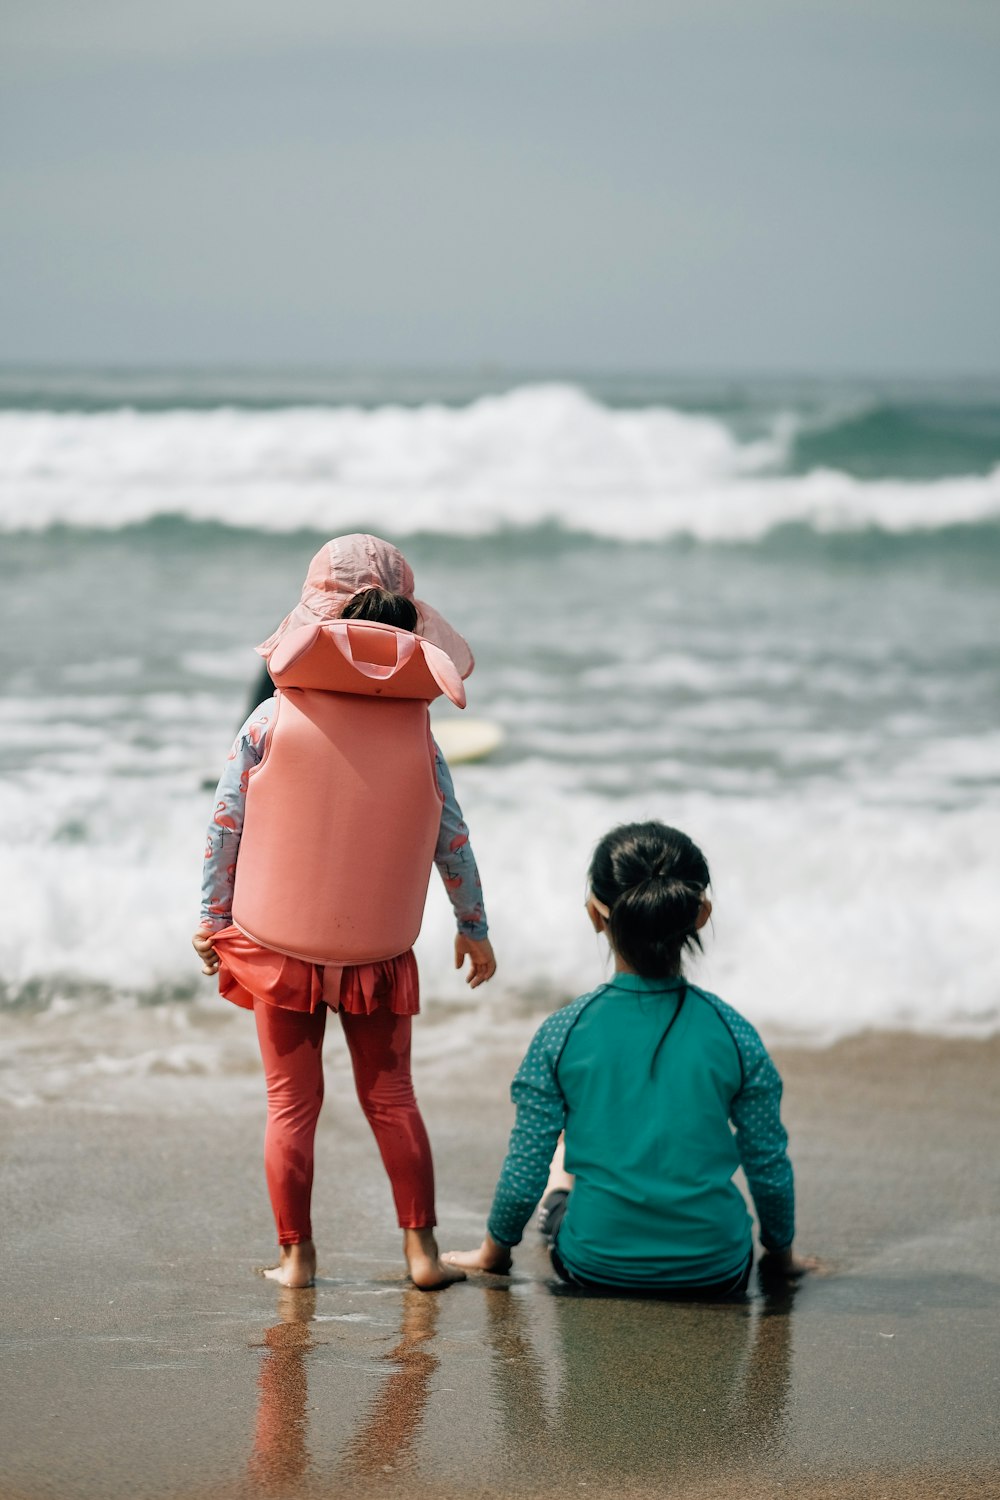 a person and a child walking on a beach